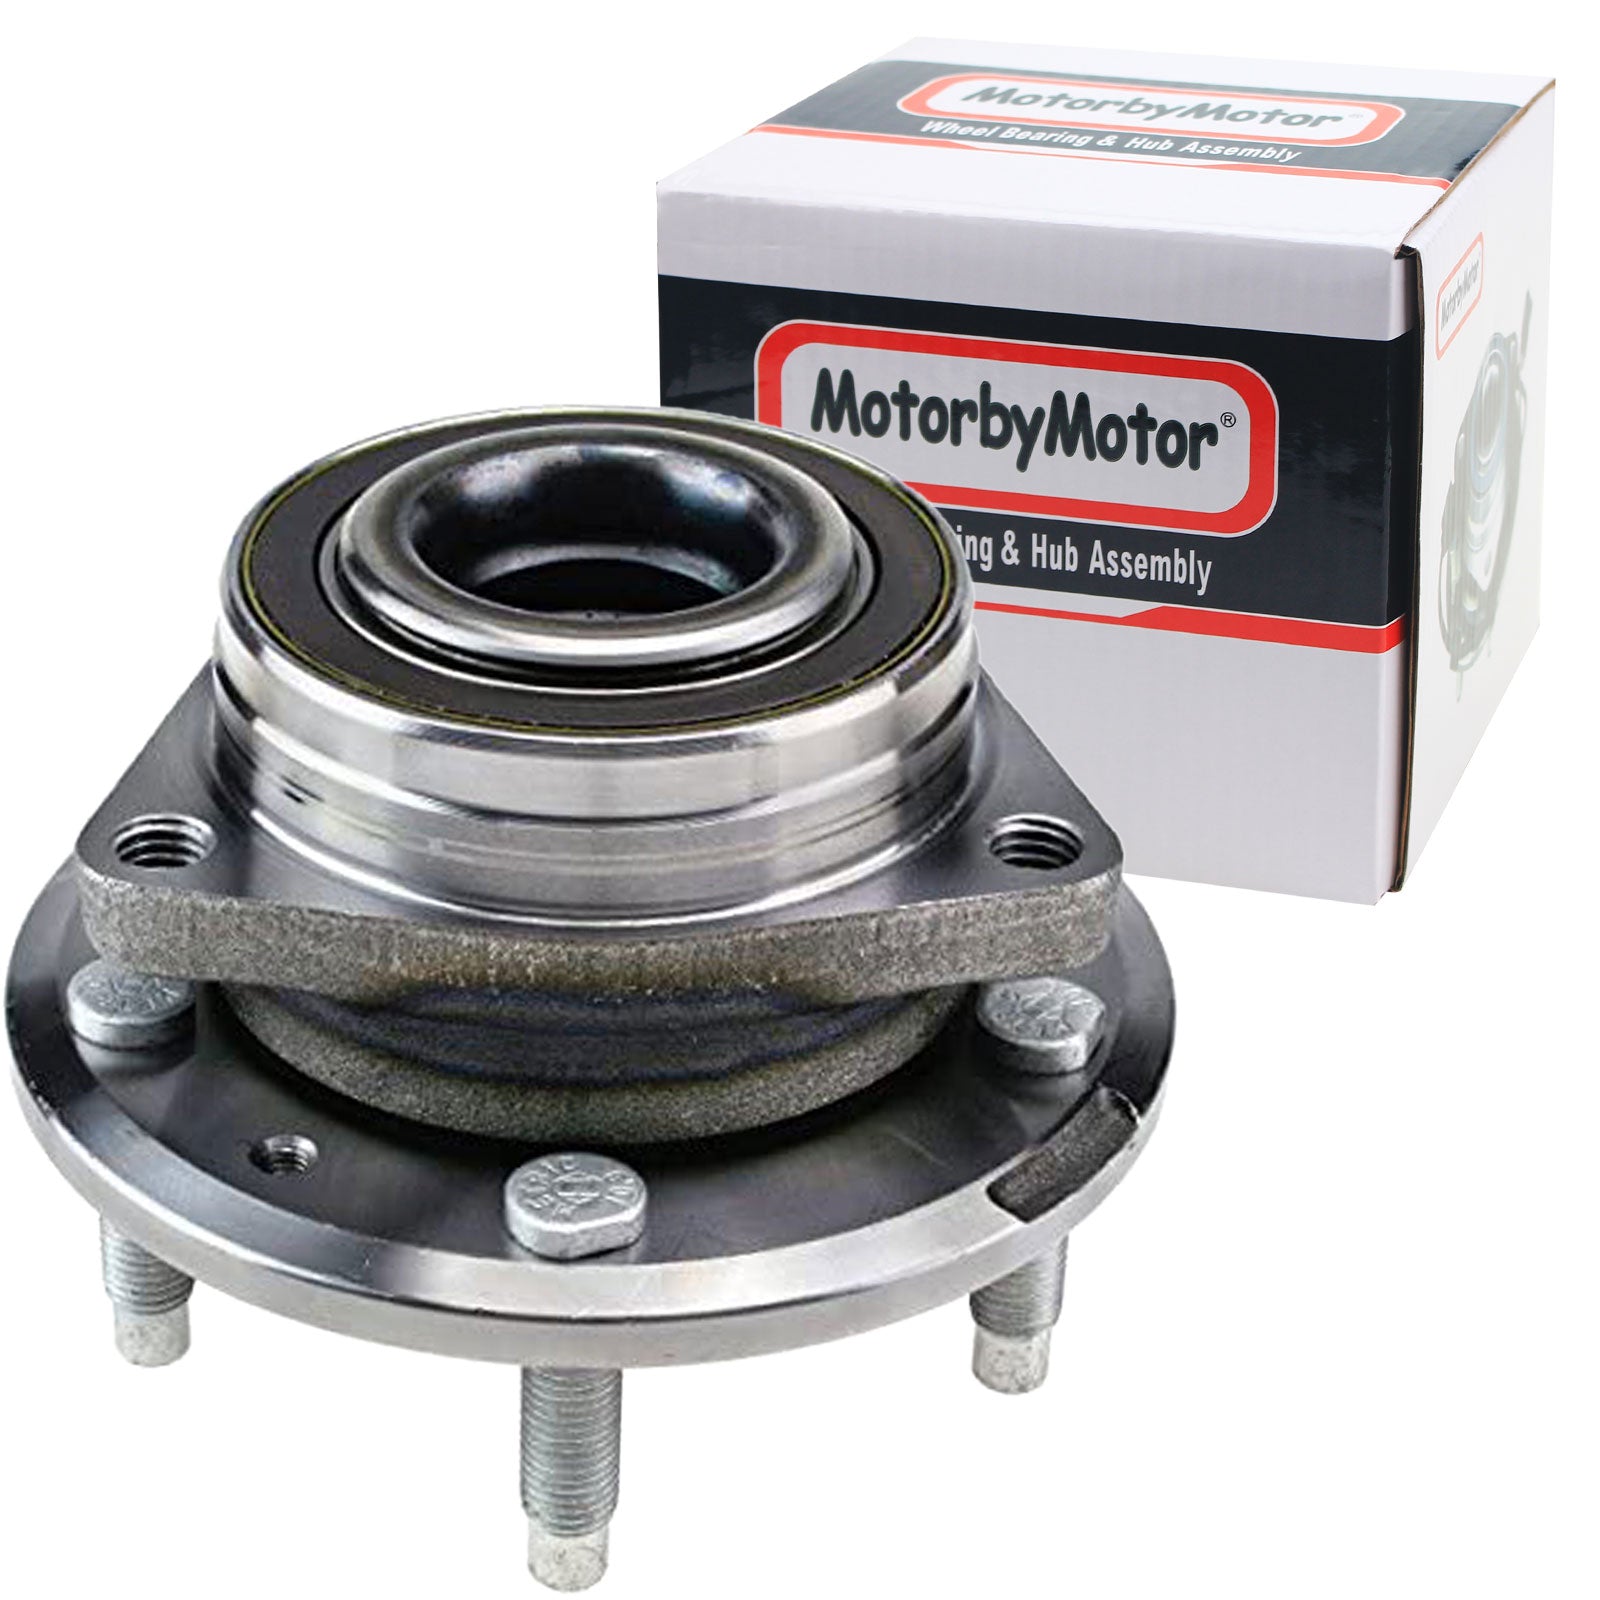 MotorbyMotor 513316 Front Wheel Bearing and Hub Assembly with 5 Lugs for Buick Cascada Verano,Cadillac ATS ELR,Chevy Cruze Orlando Volt;Rear Hub Bearing Fits Cadillac ATS Low-Runout OE Replacement AWD MotorbyMotor